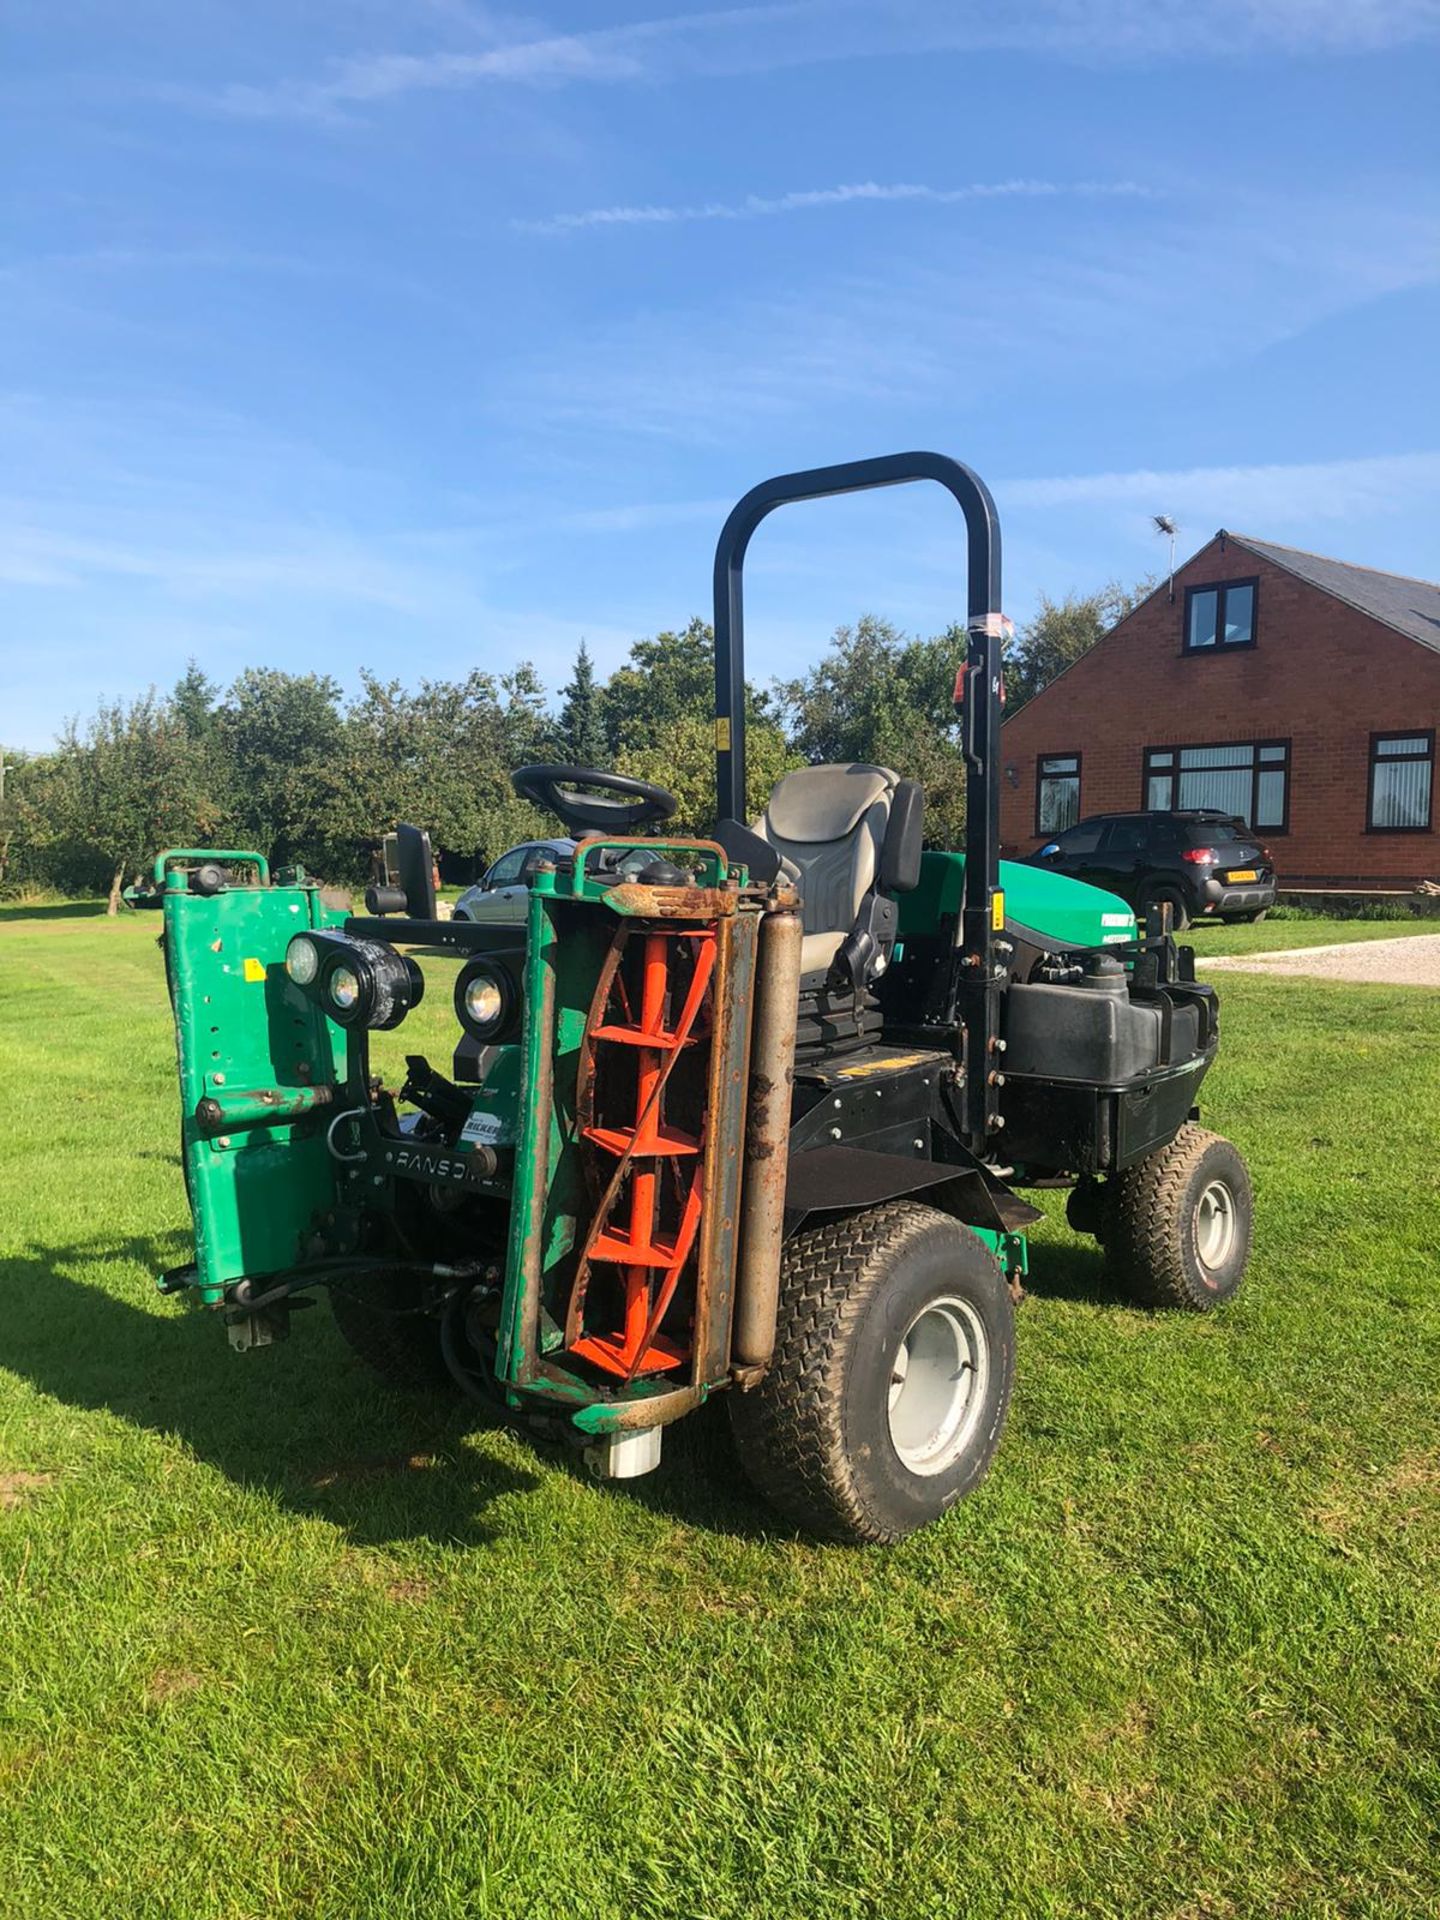 2013 RANSOMES PARKWAY 3 RIDE ON LAWN MOWER, RUNS, DRIVES AND CUTS *PLUS VAT*